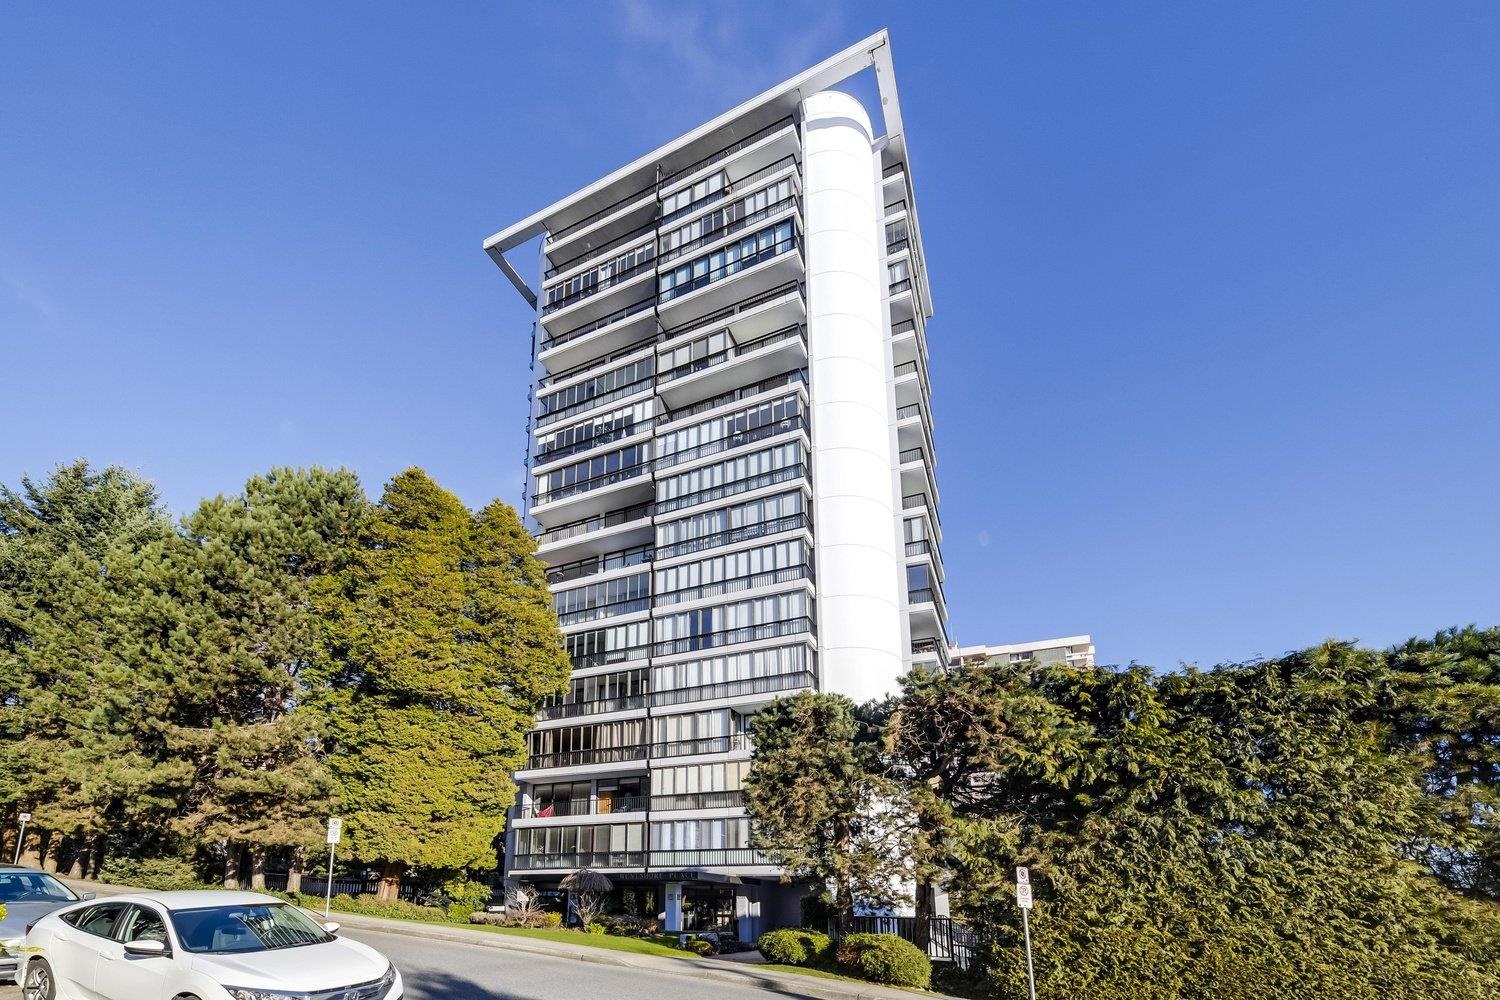 Ambleside Apartment/Condo for sale:  2 bedroom 1,000 sq.ft. (Listed 5200-04-28)